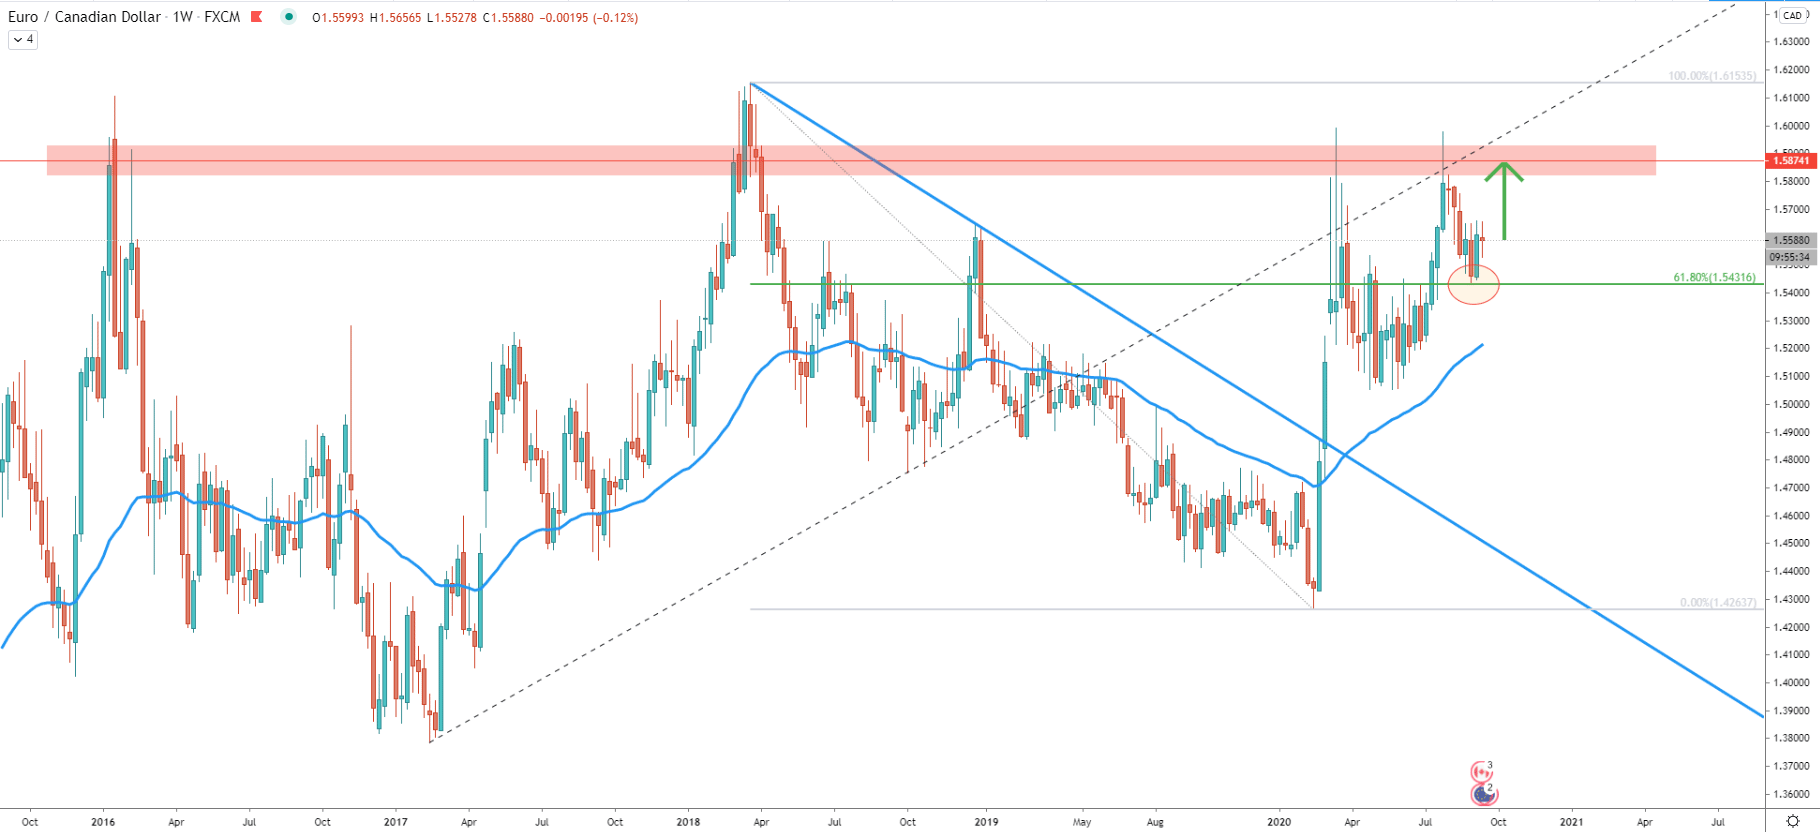 EUR/CAD Weekly Technical Analysis 18 Sep 2020